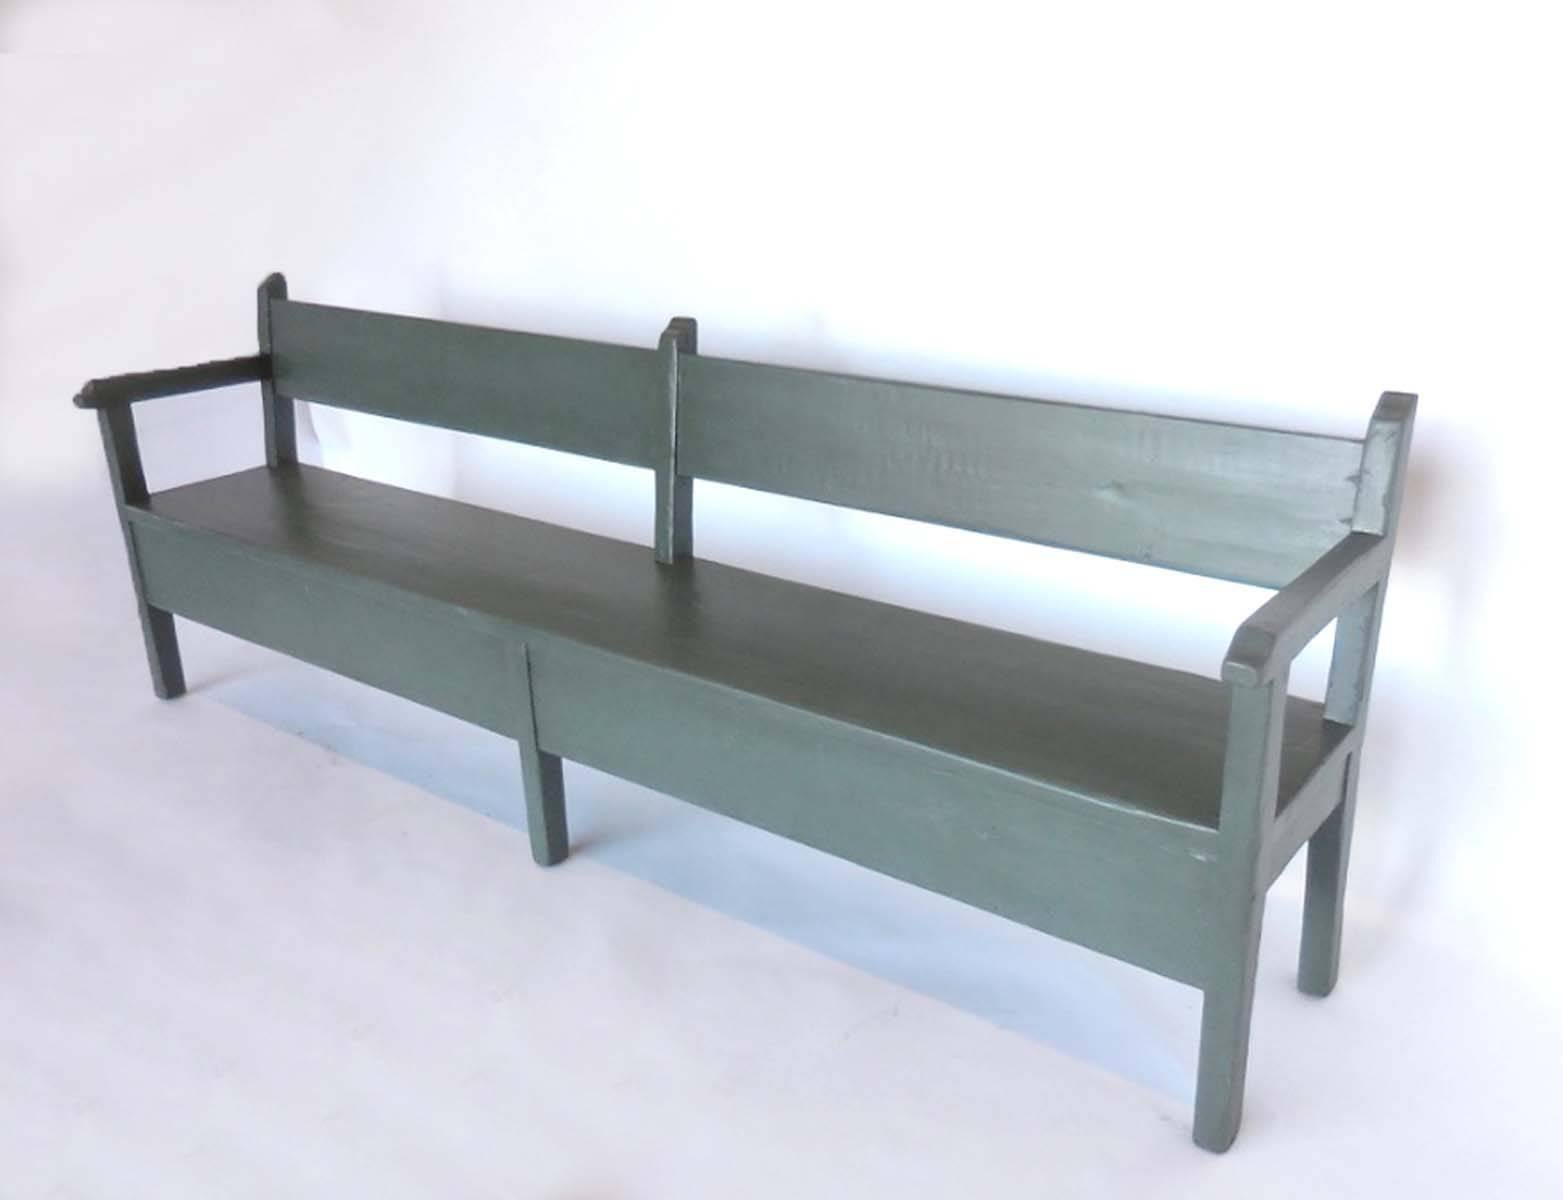 Custom bench made by Dos Gallos Studio. Can be made any size and in custom finishes. As shown here, in Coldwell Green, Benjamin Moore HC-124 with an antique glaze. Made in Los Angeles.
PRICES ARE SUBJECT TO CHANGE. PLEASE INQUIRE BEFORE PLACING AN